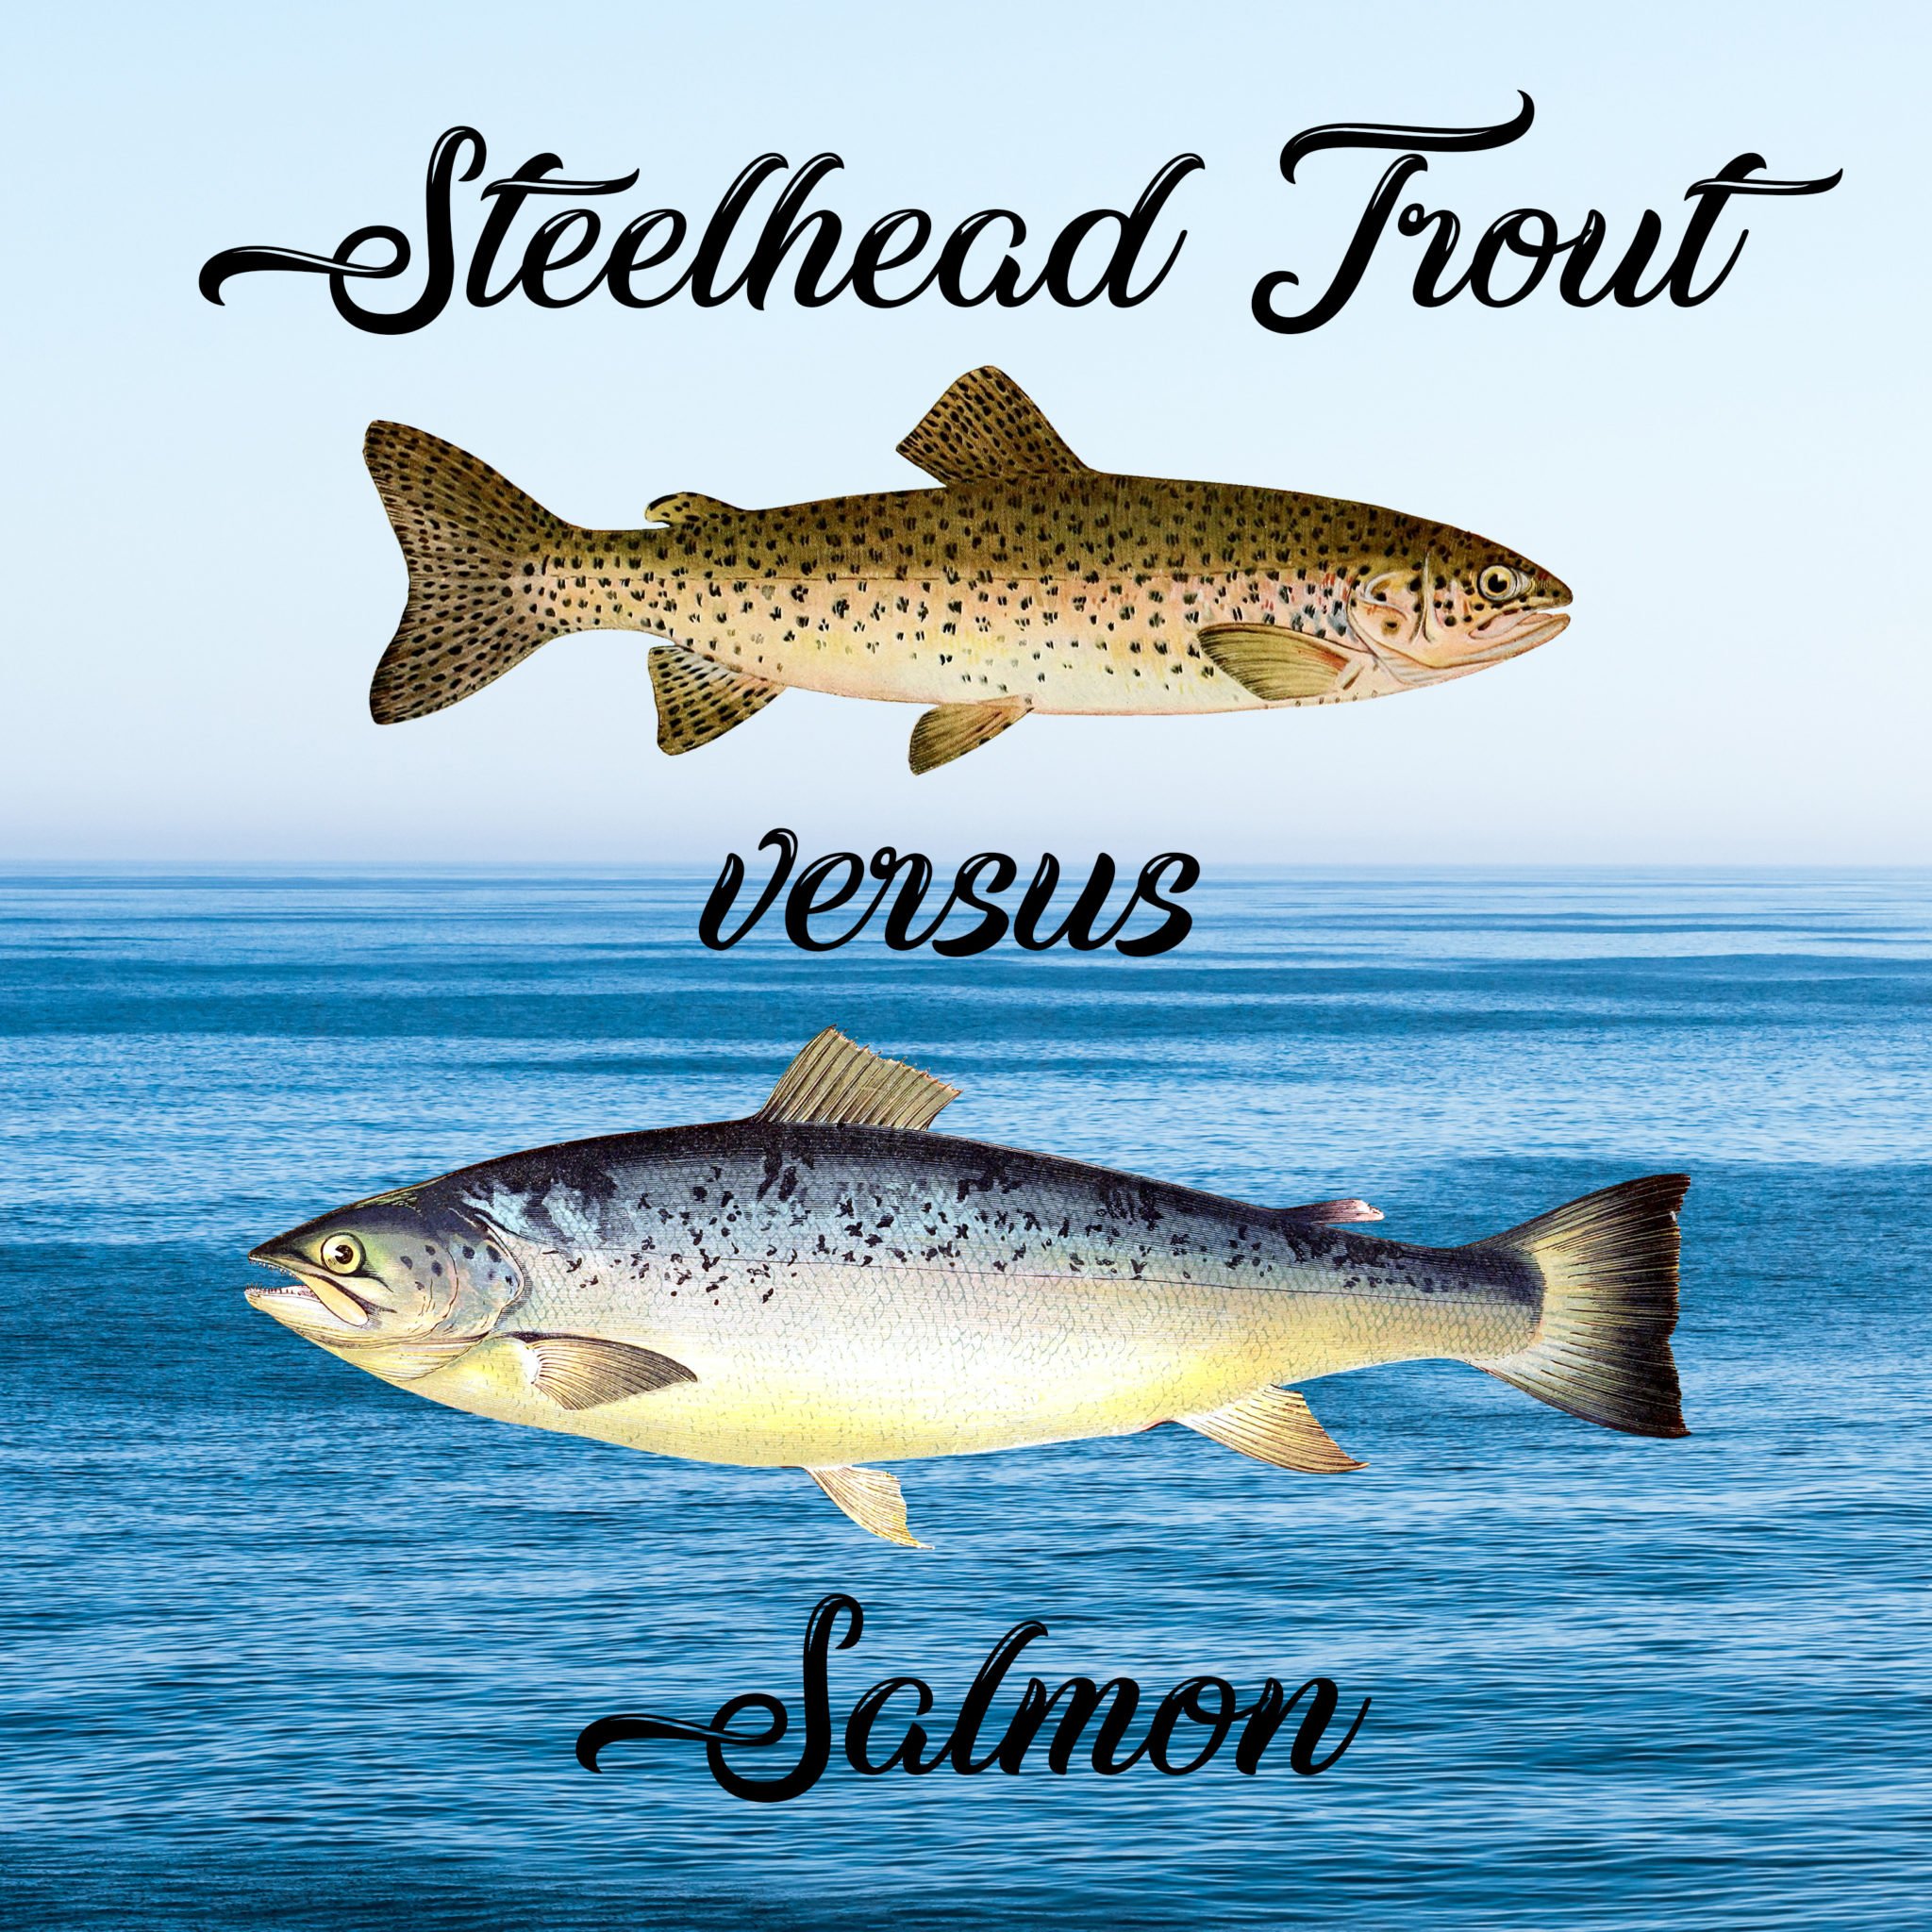 The difference between steelhead trout versus salmon